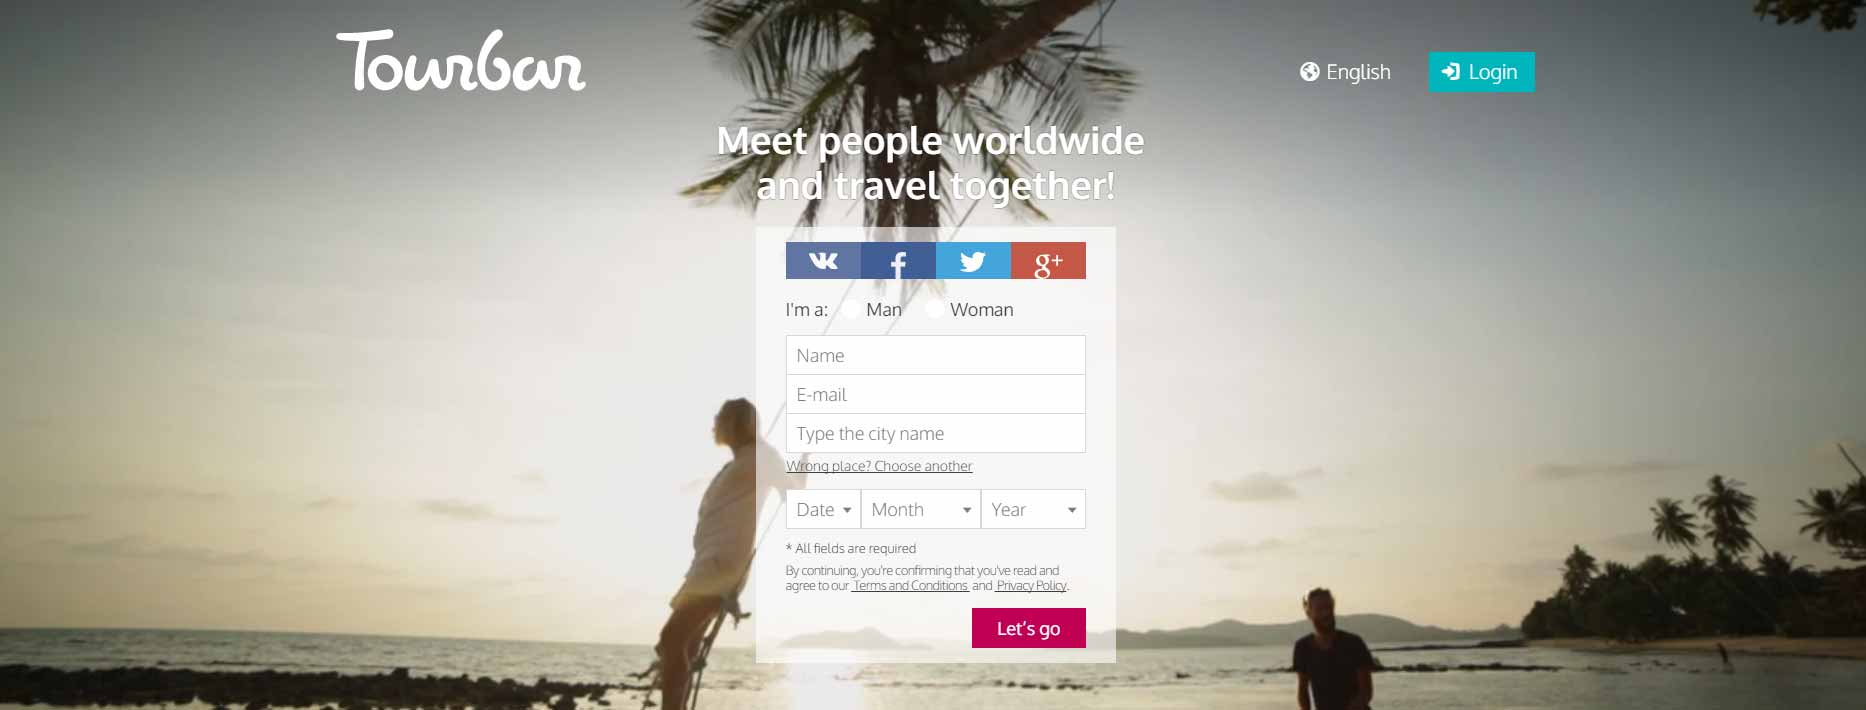 Best Internet Dating Site Archives - AS Travel